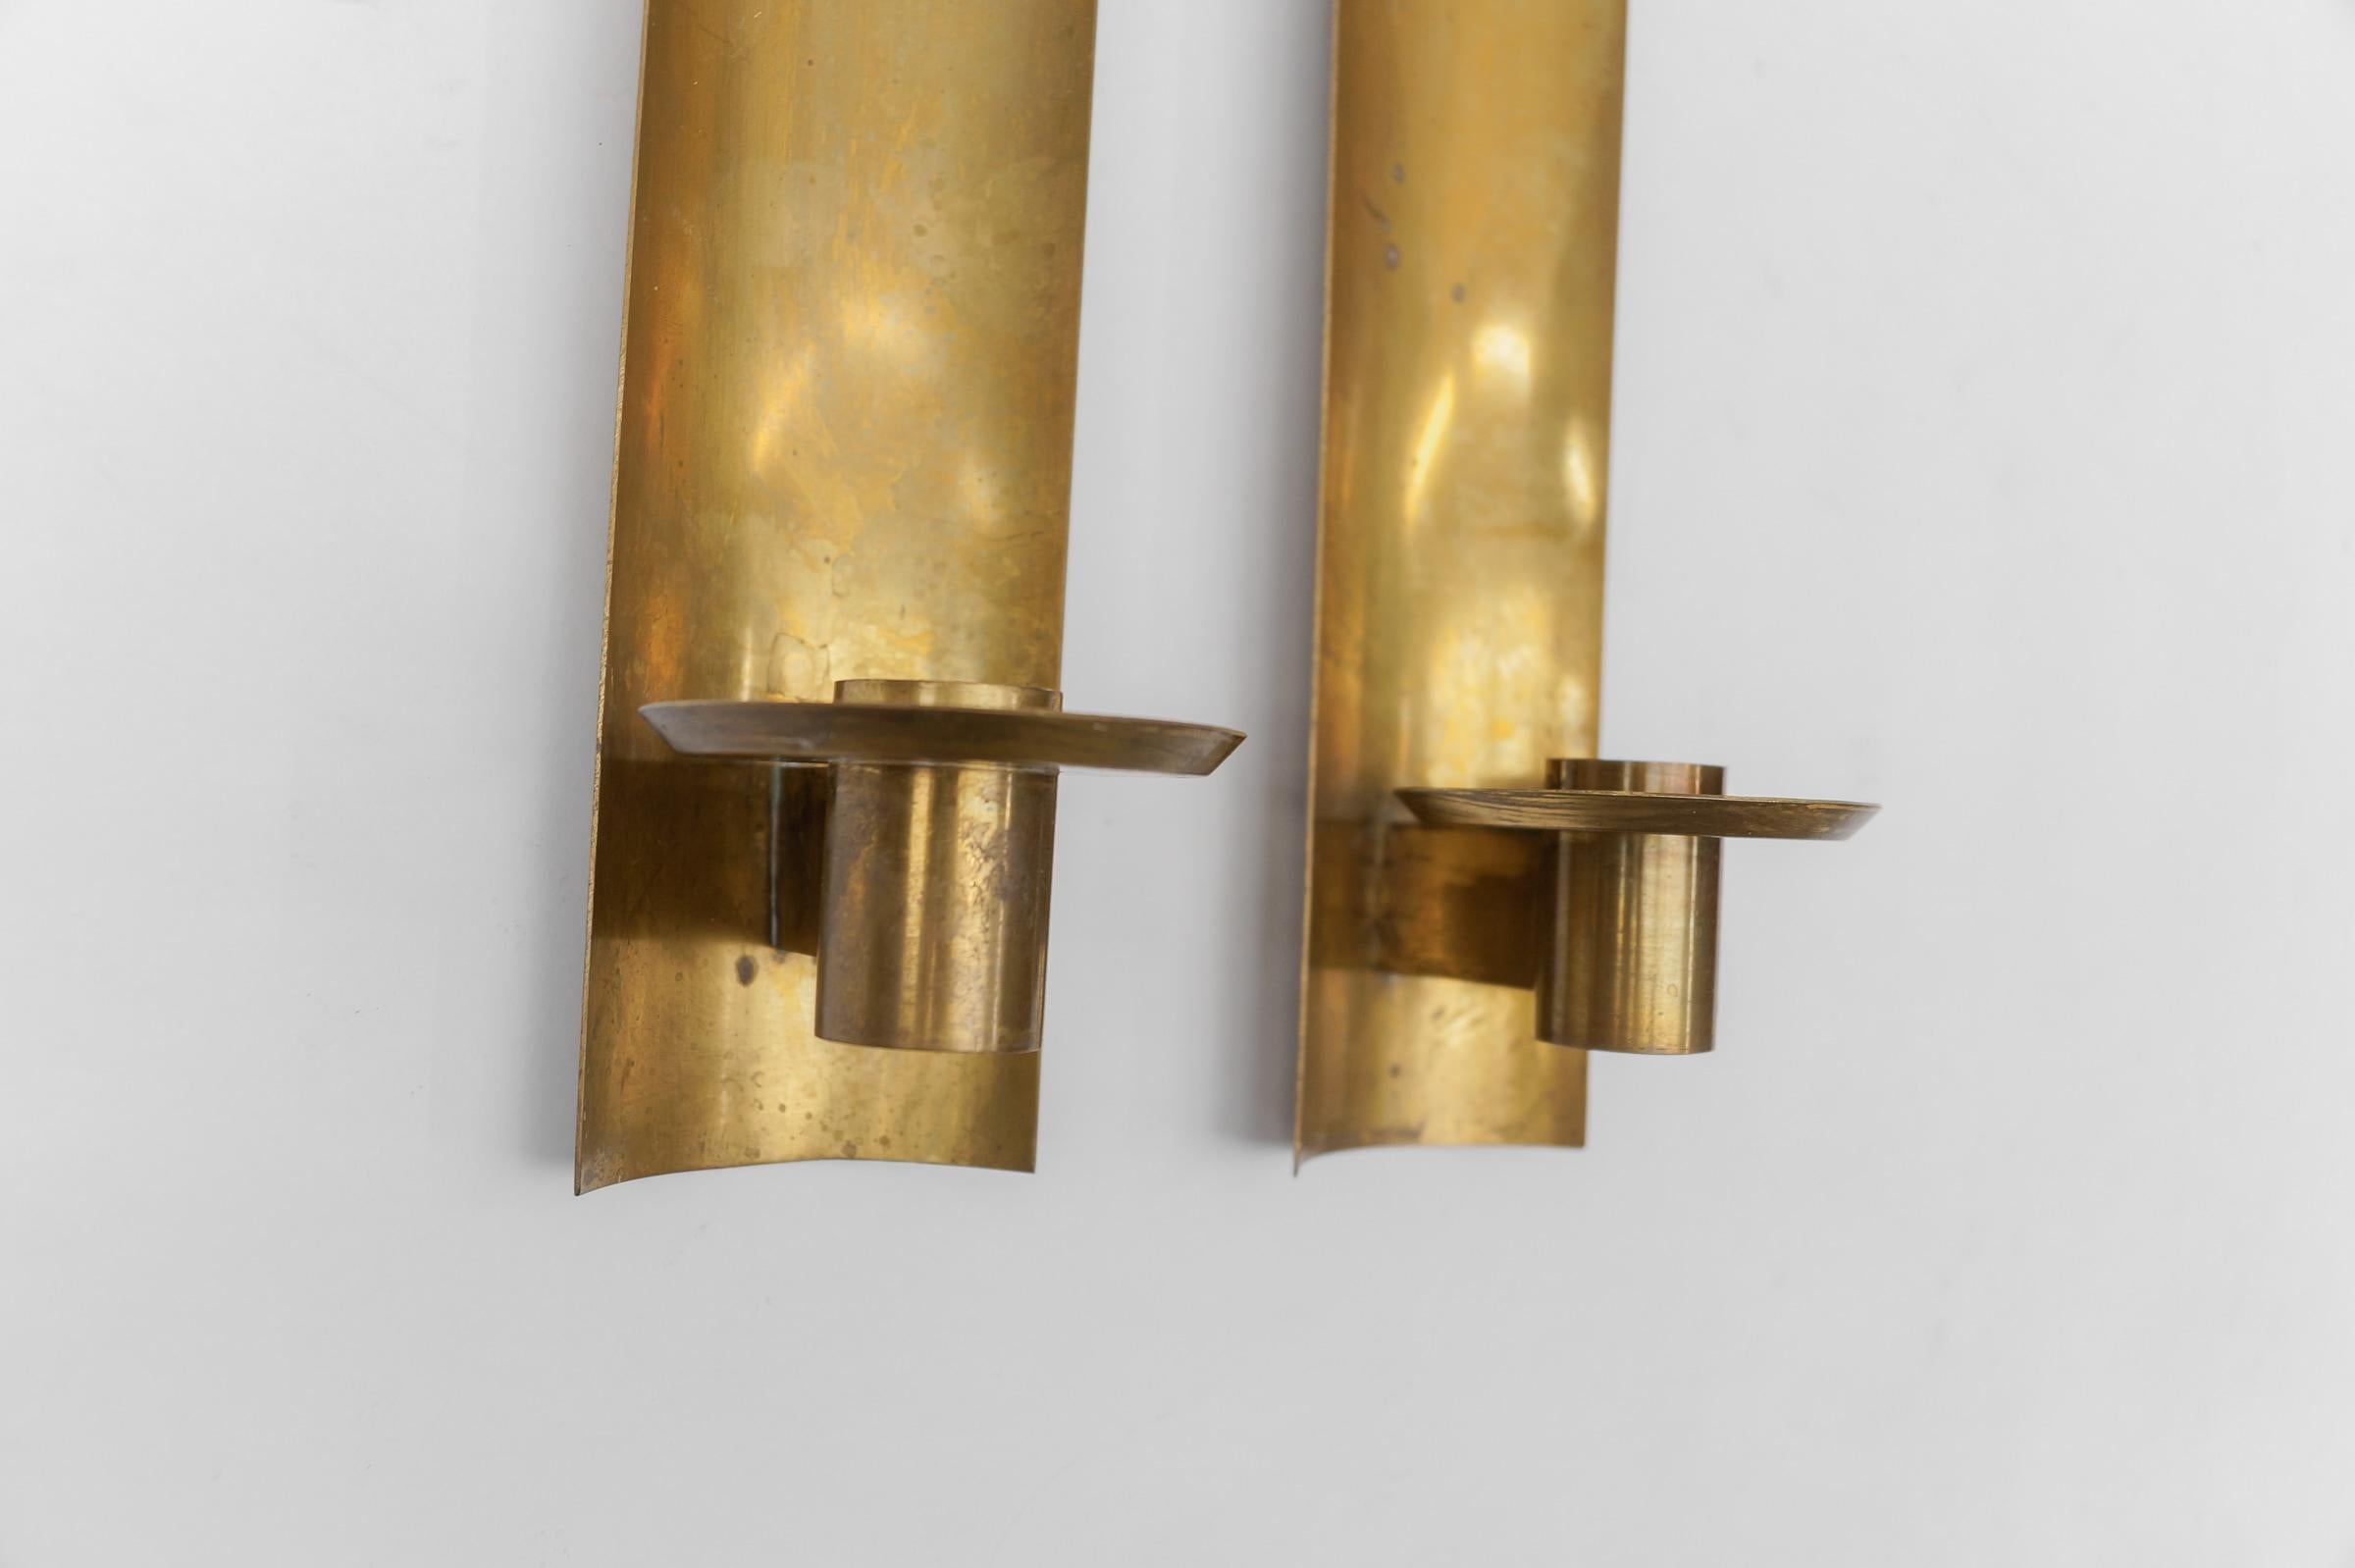 Awesome Pair of Brass Wall Candle Holder, 1950s Austria For Sale 1